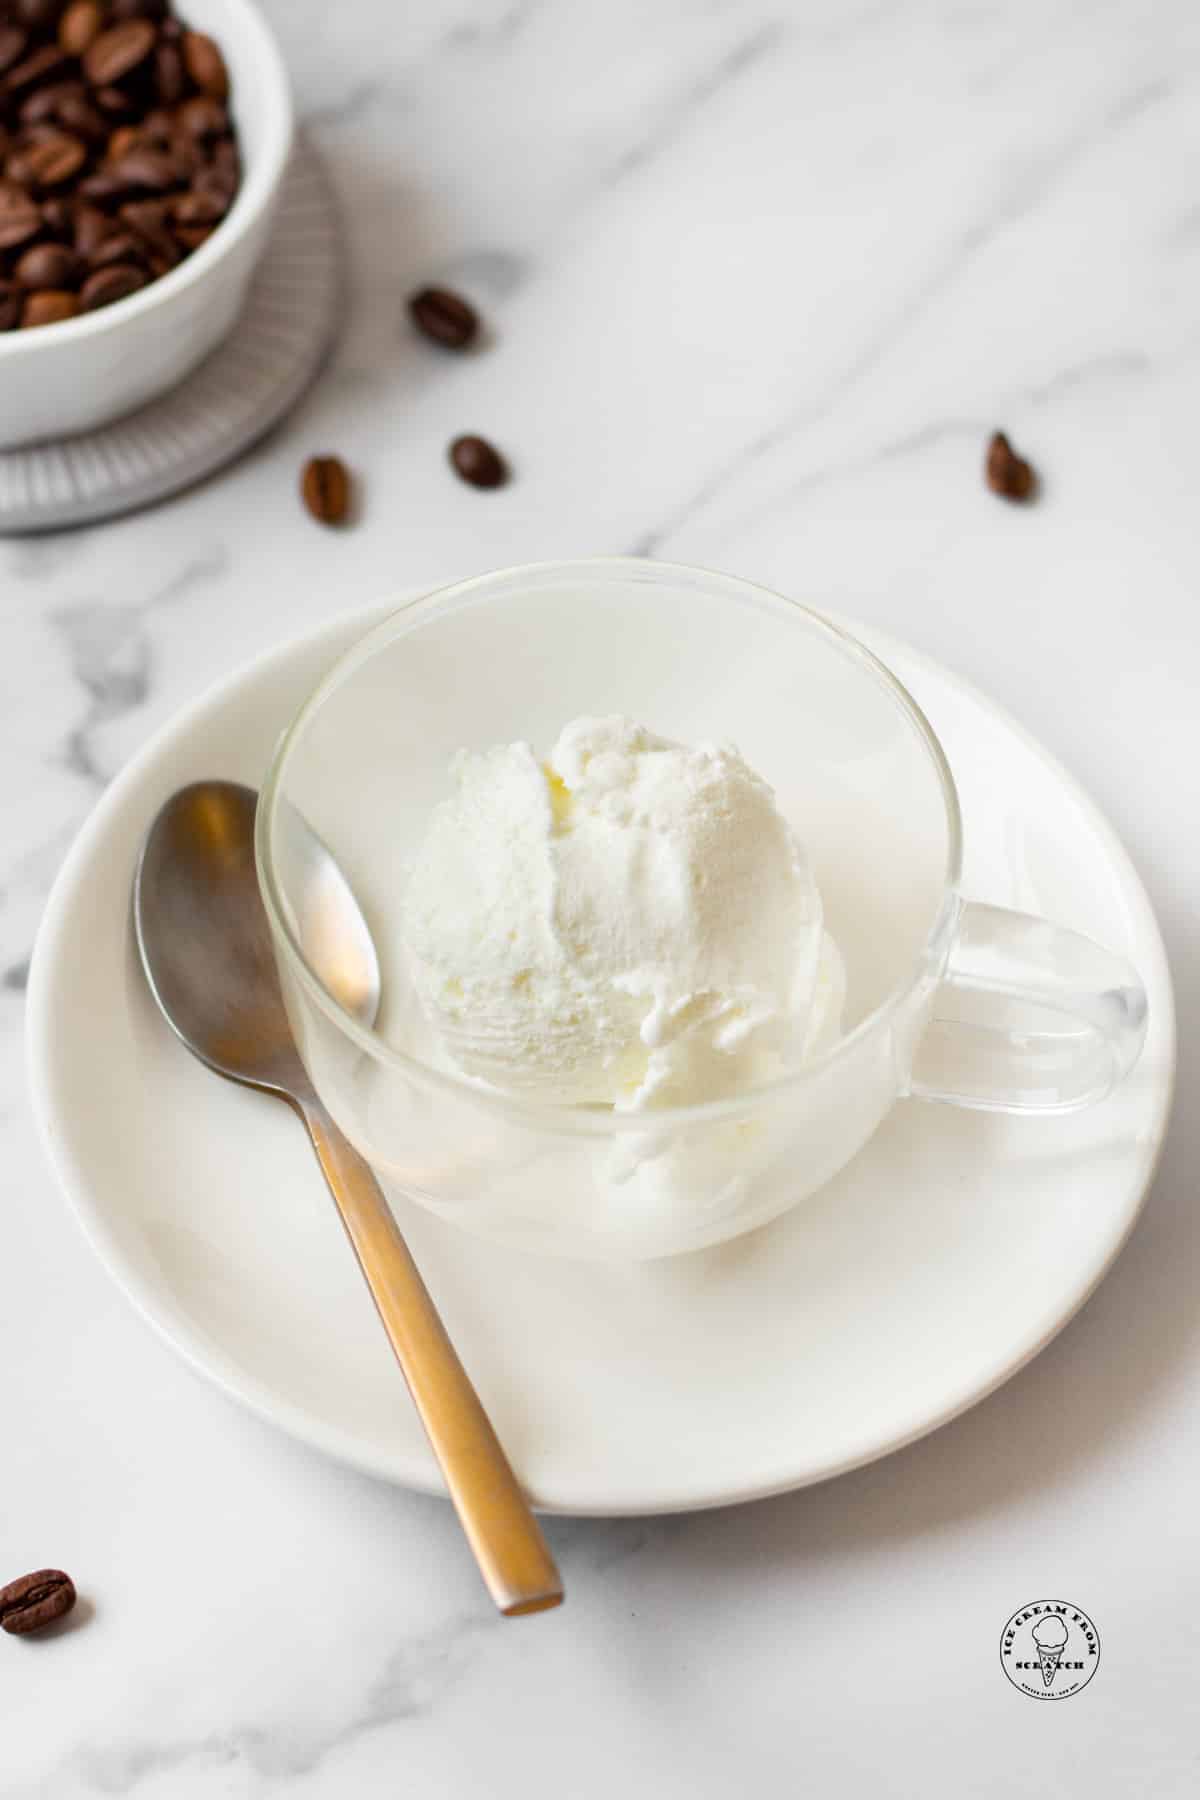 a clear coffee mug filled with a scoop of vanilla ice cream, on a saucer with a teaspoon.